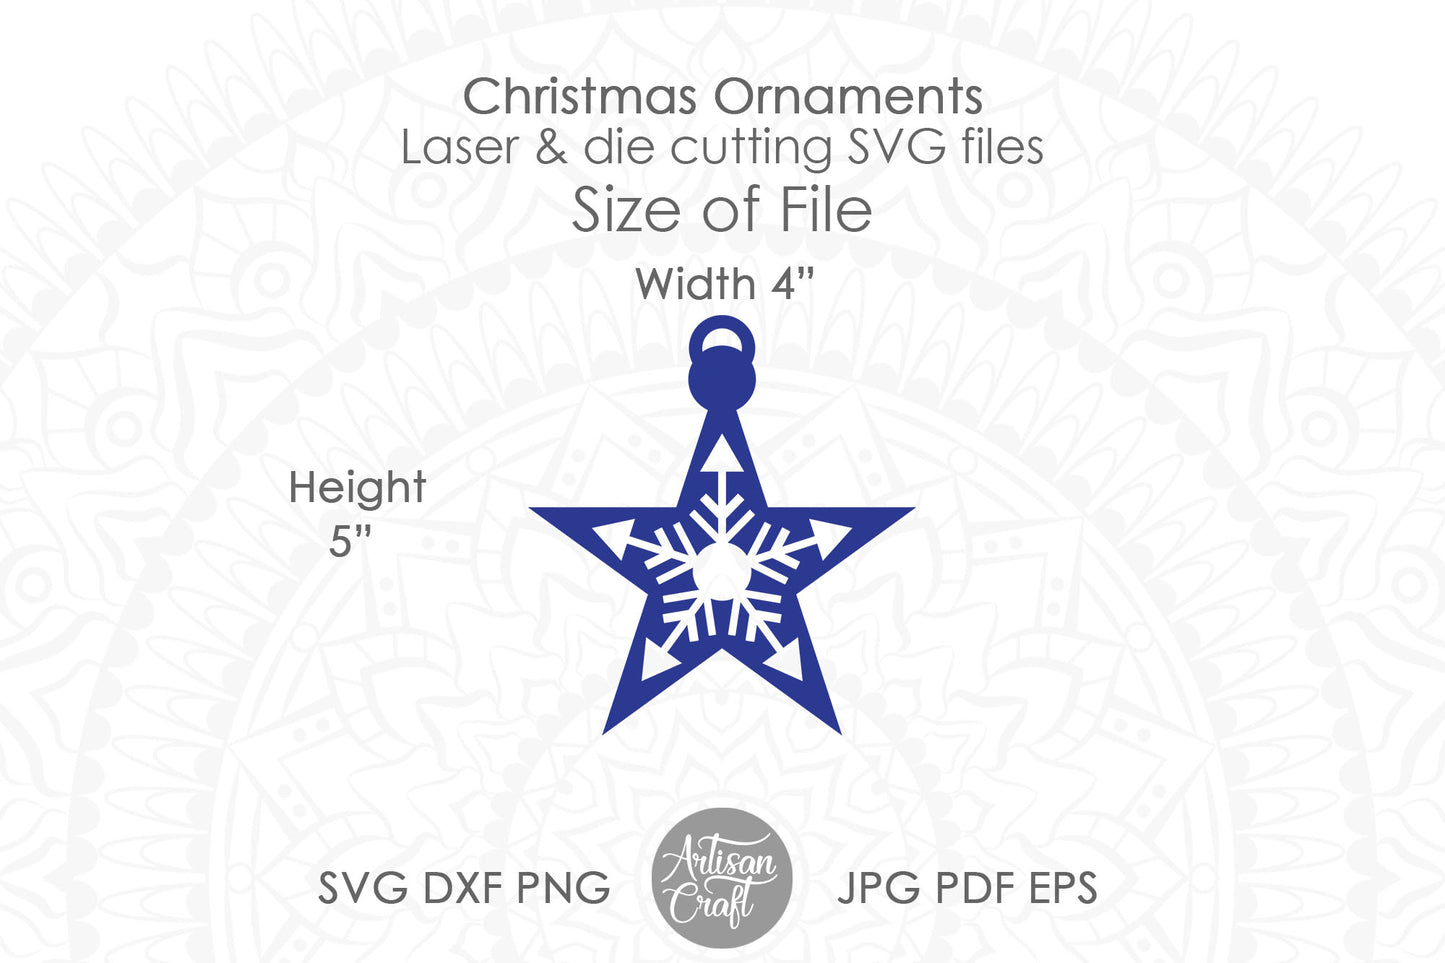 Star Christmas ornament SVG laser cut file with 5 point star